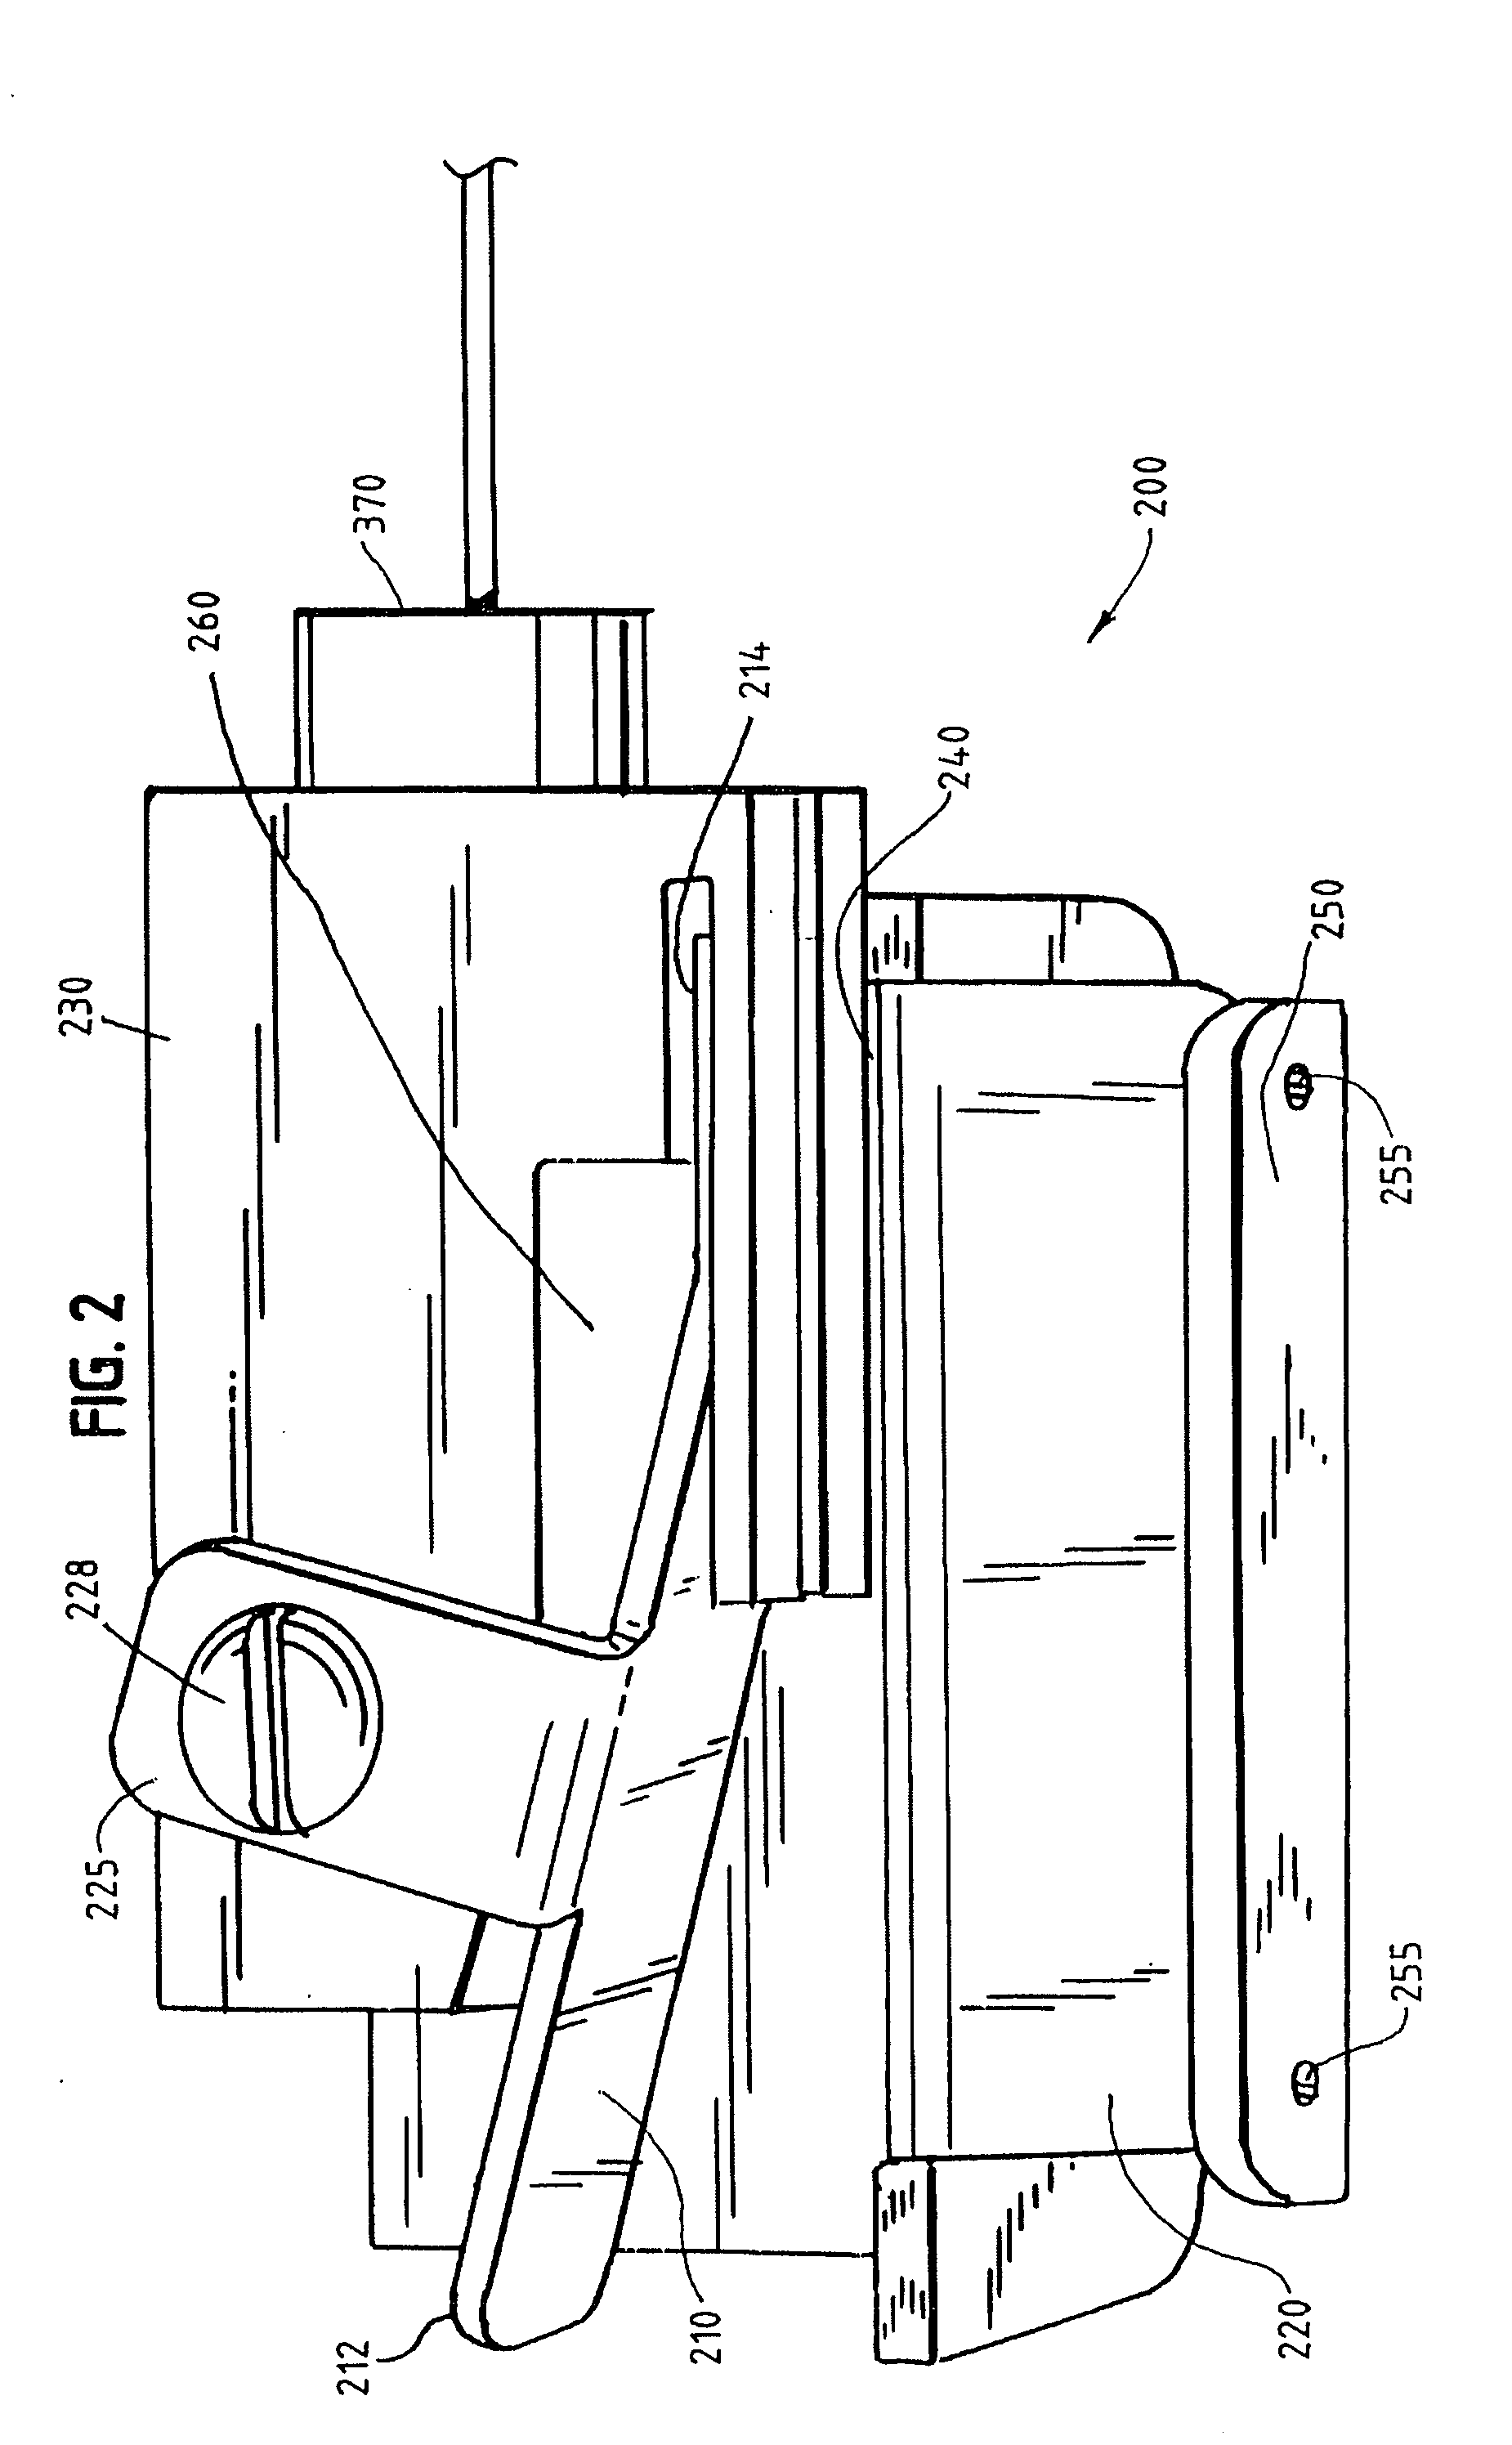 High voltage arm assembly with integrated resistor, automatic high voltage deflection electrode locator, and special insulation